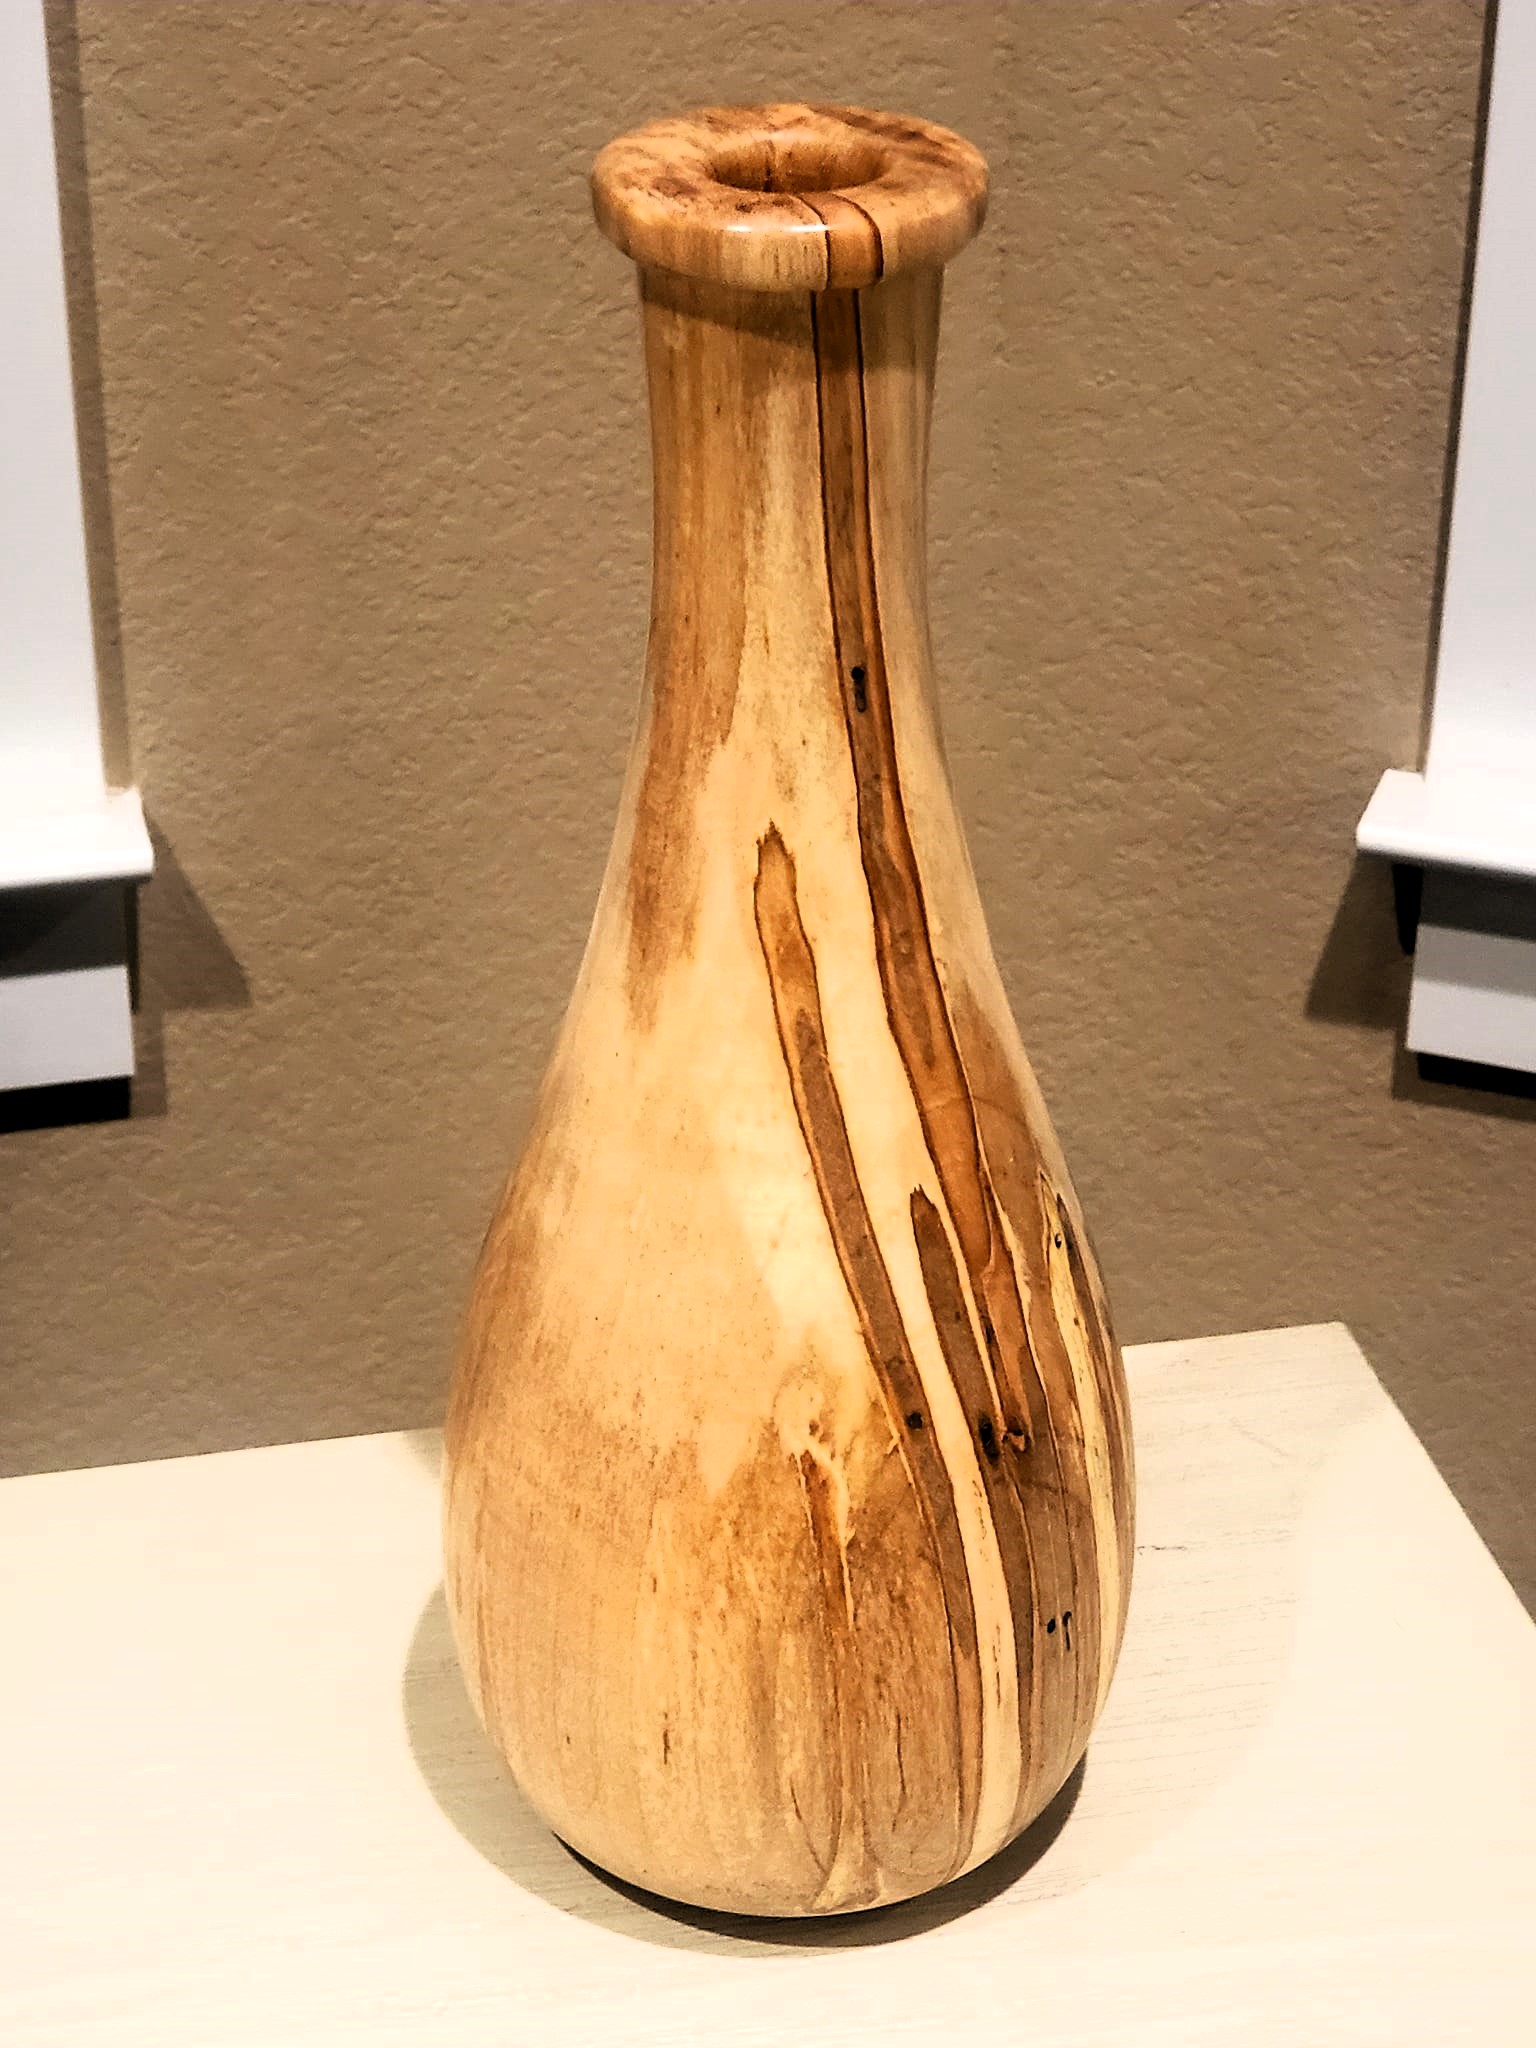 Wood Vase - Kiln dried natural color ambrosia spalted maple with 7 layers of heated crystalized polish